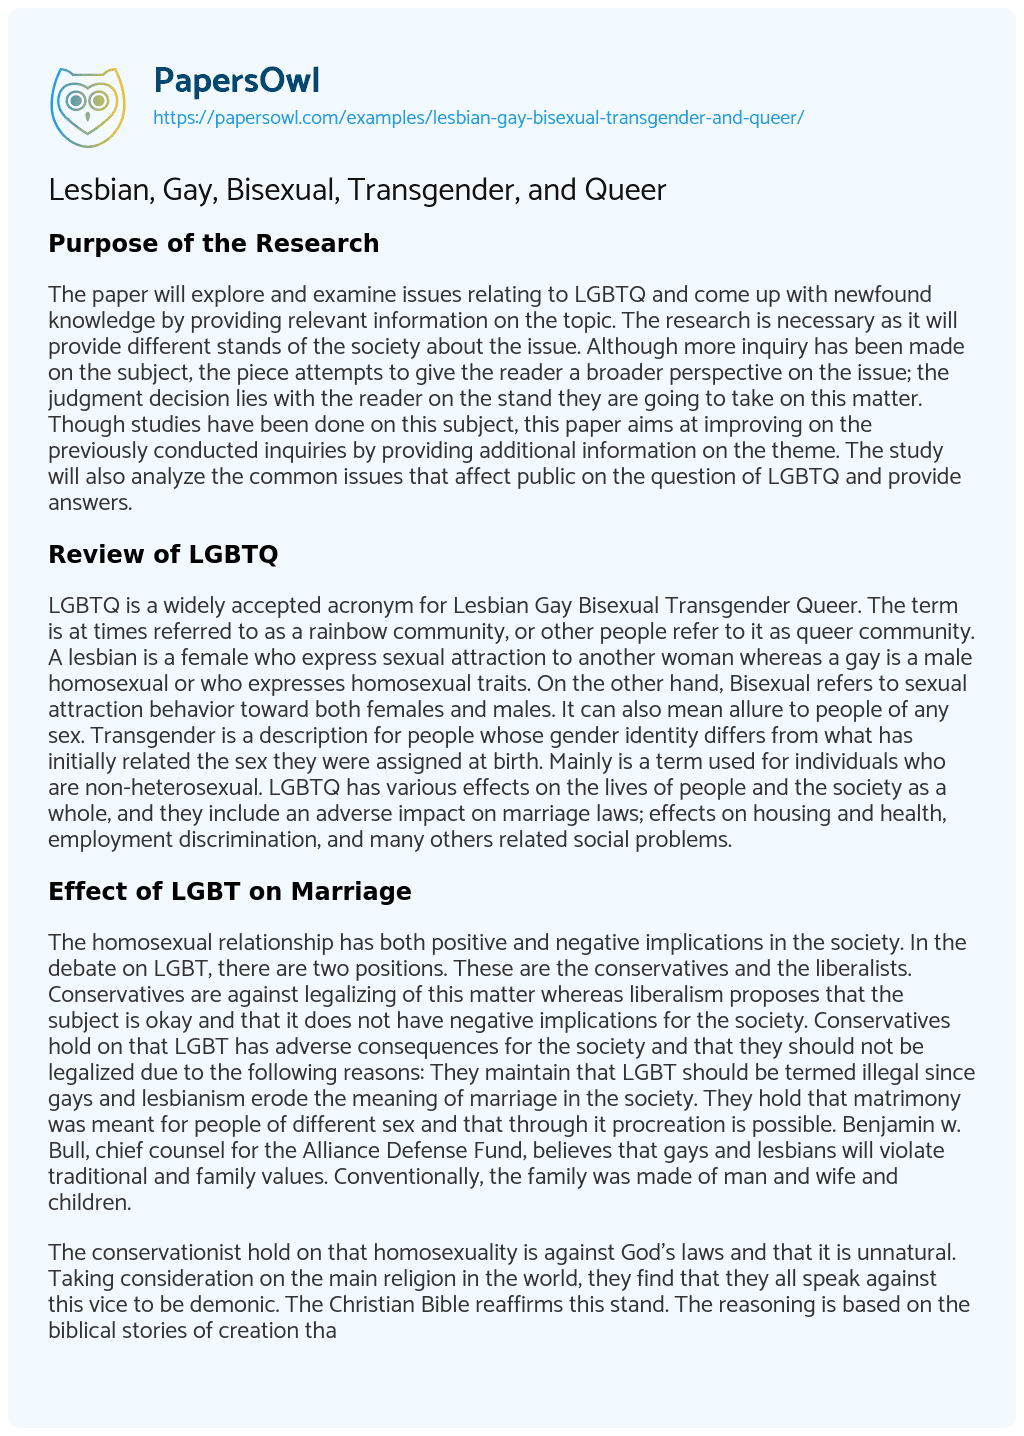 Essay on Lesbian, Gay, Bisexual, Transgender, and Queer